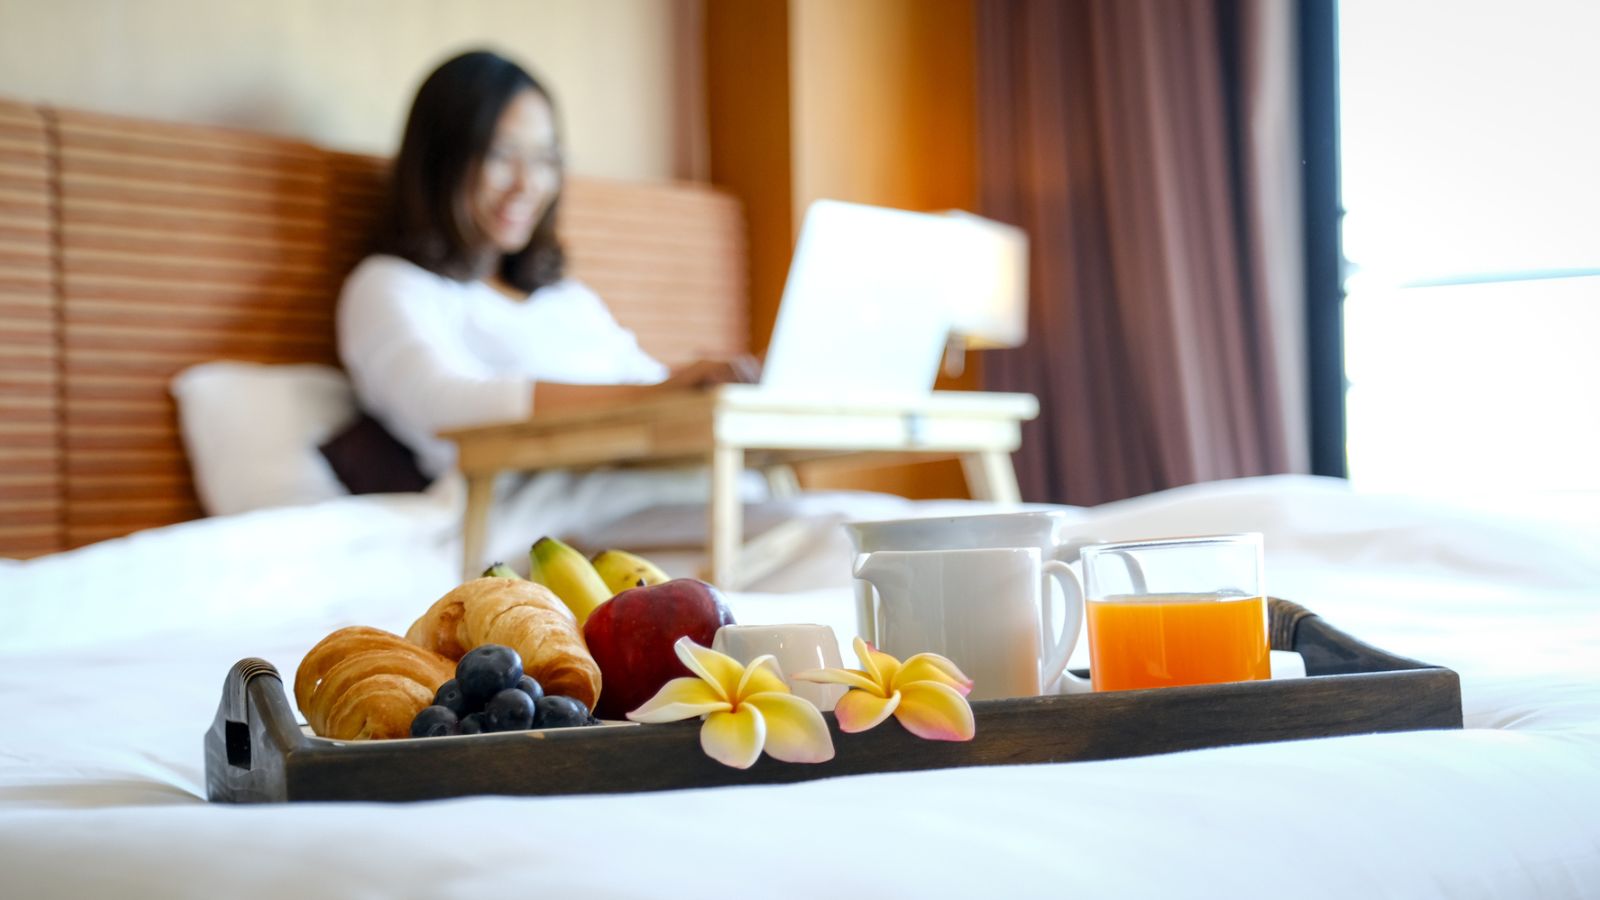 <p>It's common for hotel bookings to offer add-ons like Wi-Fi or drink packages that you can upgrade to without actually seeing them. So, take time to read through all the details before making your reservation.</p>